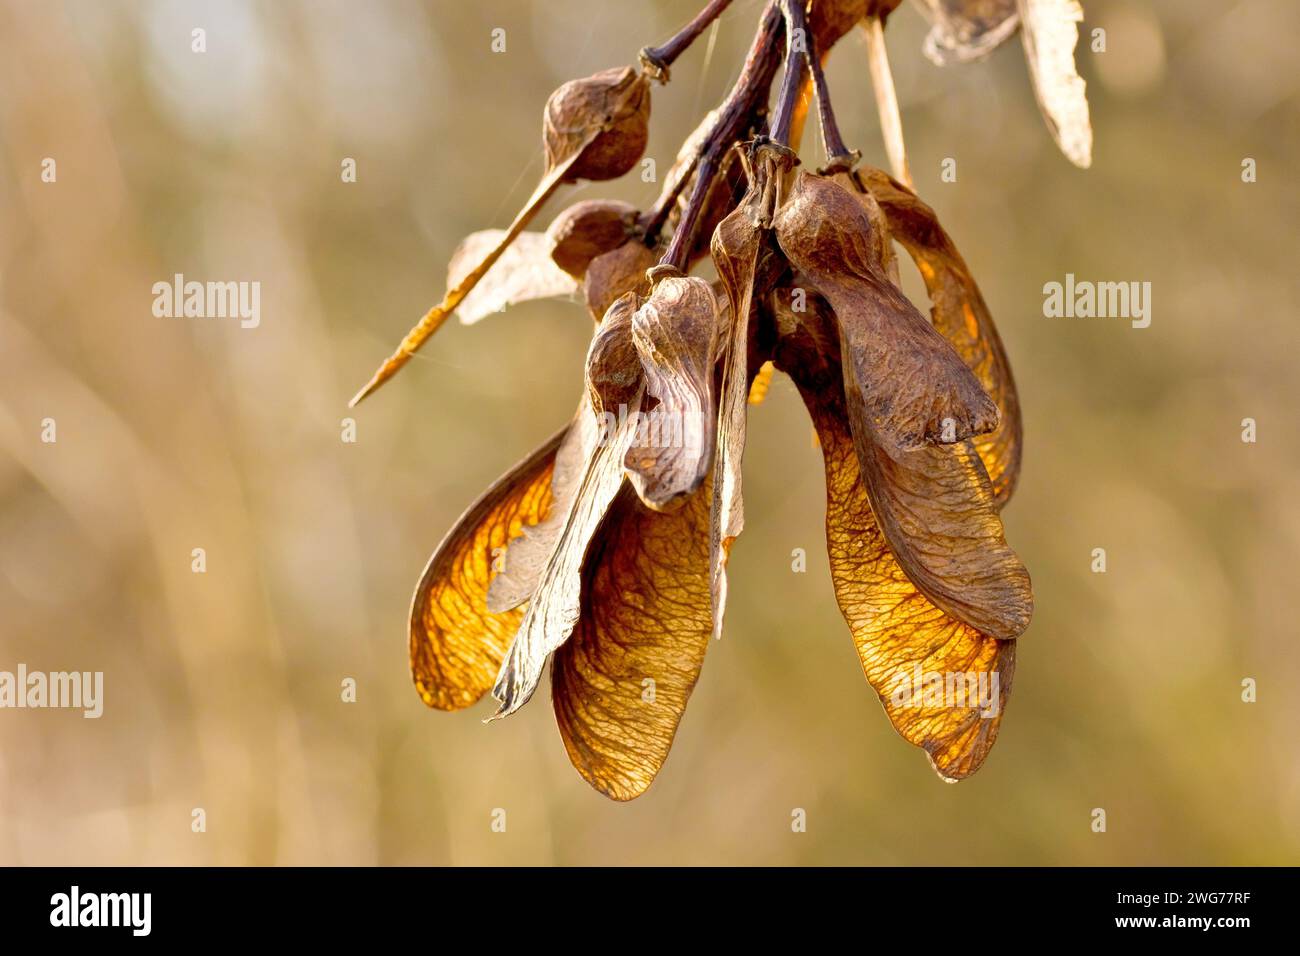 Sycamore (acer pseudoplatanus), close up showing a group of the distinctive winged seeds of the tree back lit by a low autumn sun. Stock Photo